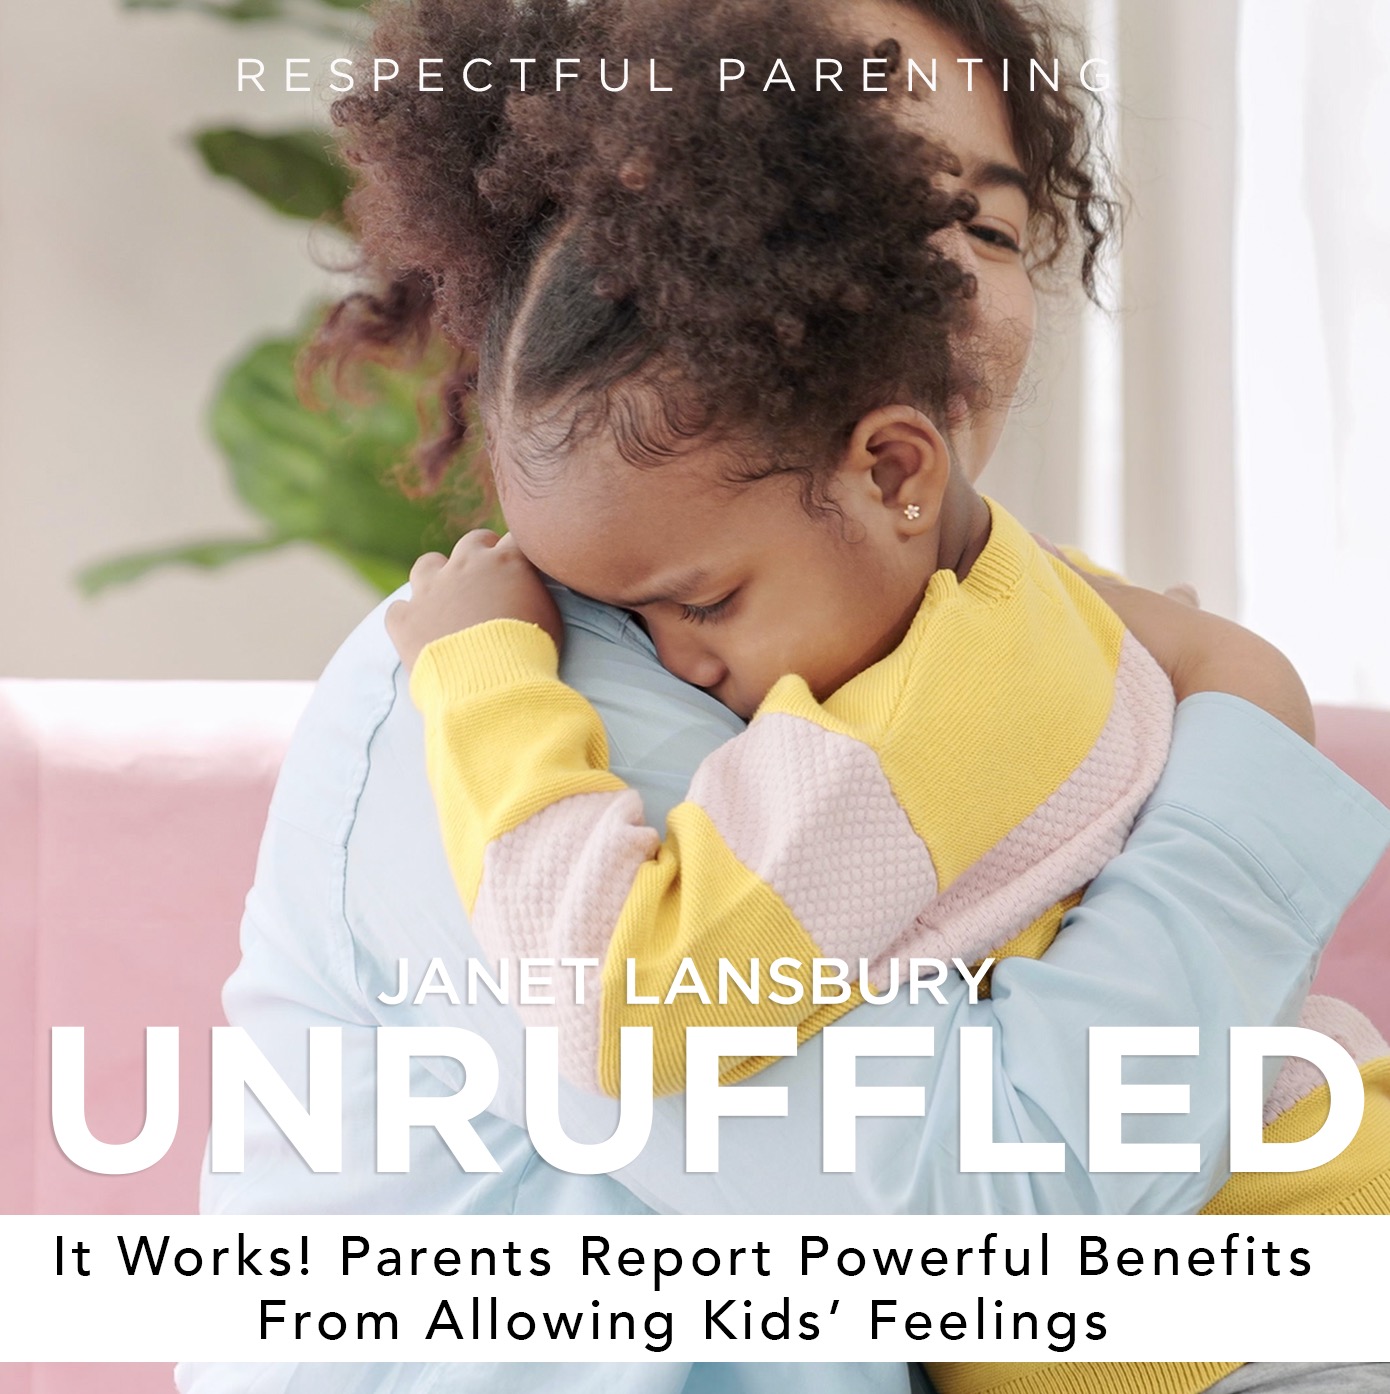 It Works! Parents Report Powerful Benefits From Allowing Kids’ Feelings